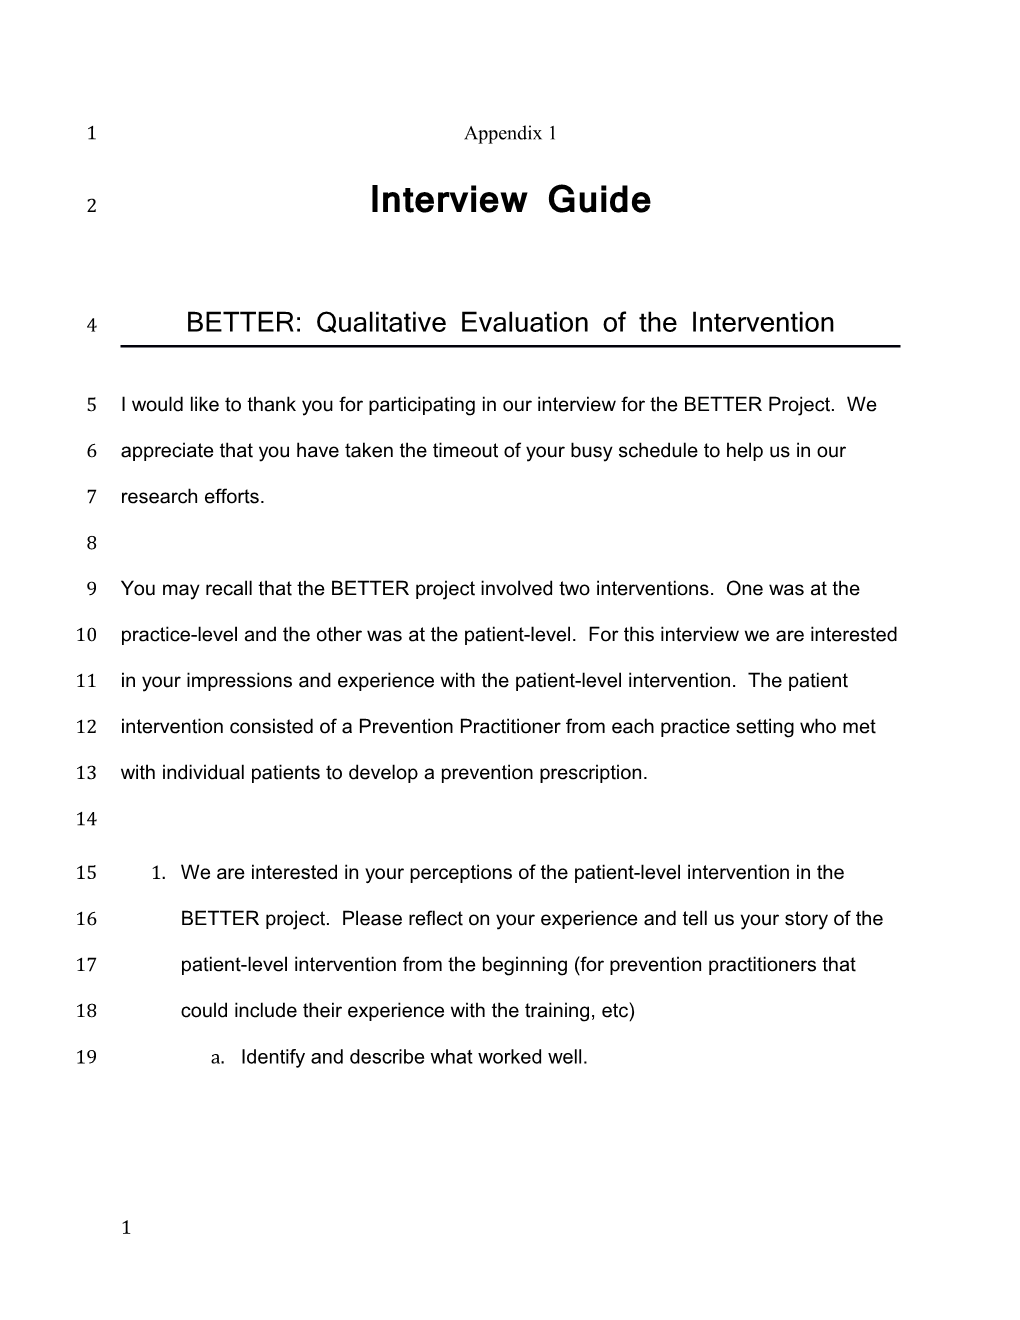 BETTER: Qualitative Evaluation of the Intervention